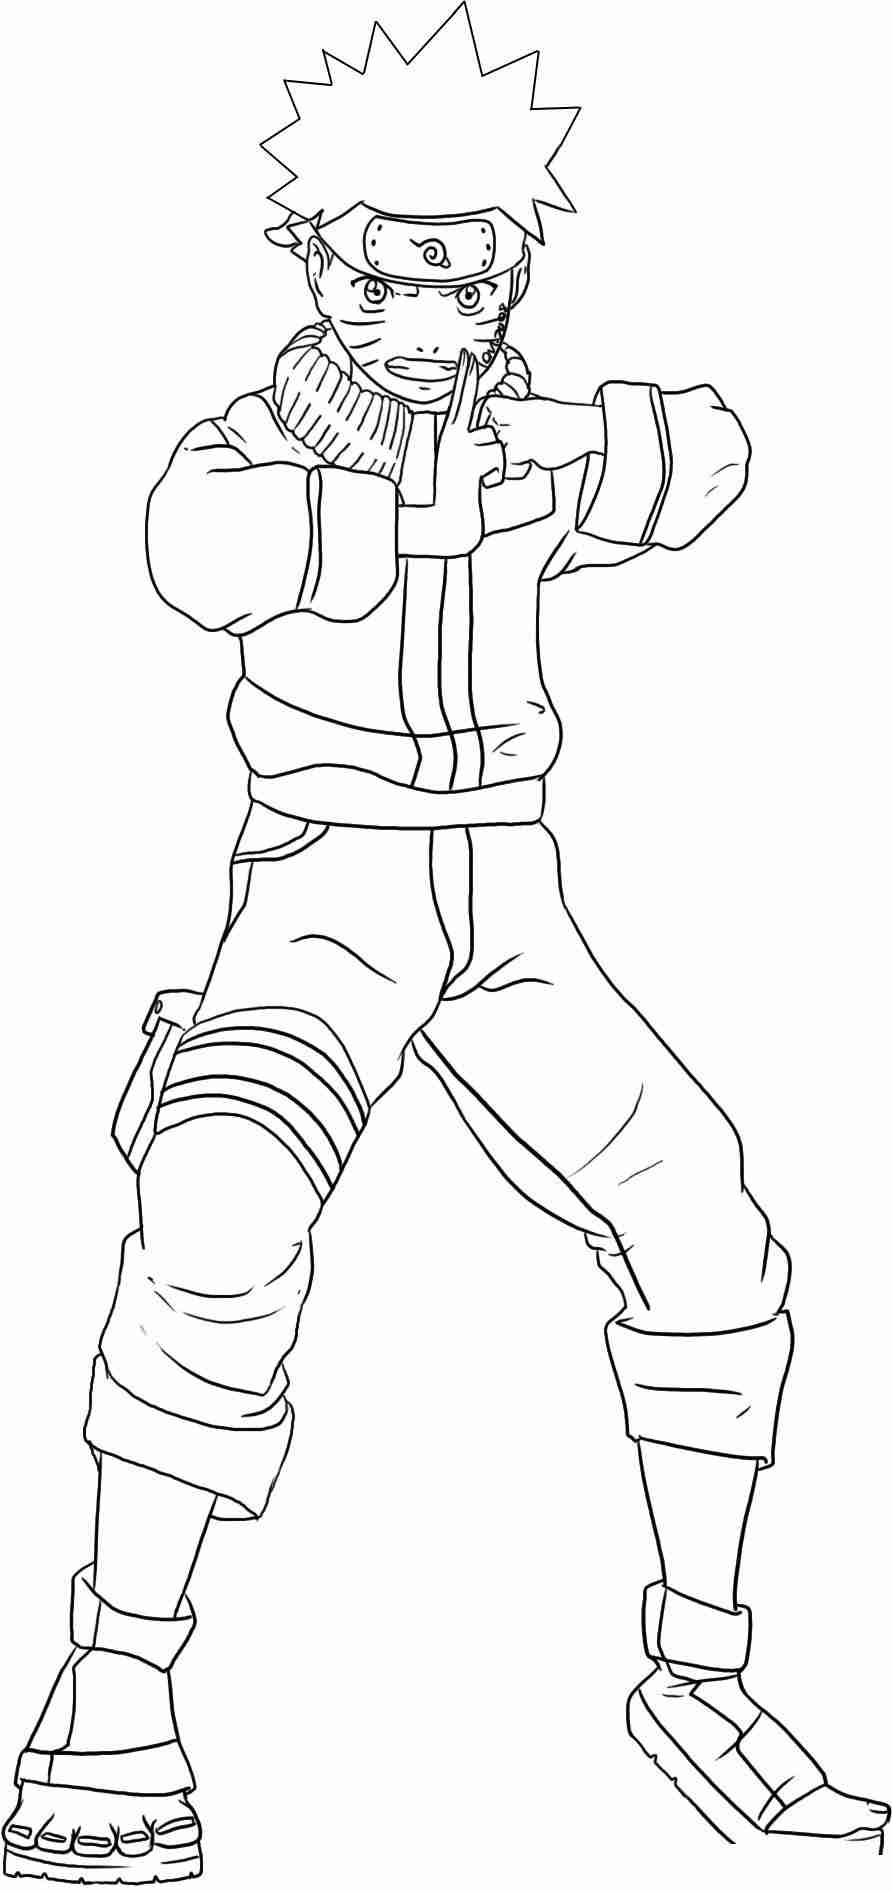 Handsome Uzumaki Naruto boy Coloring Pages - Cartoons Coloring Pages